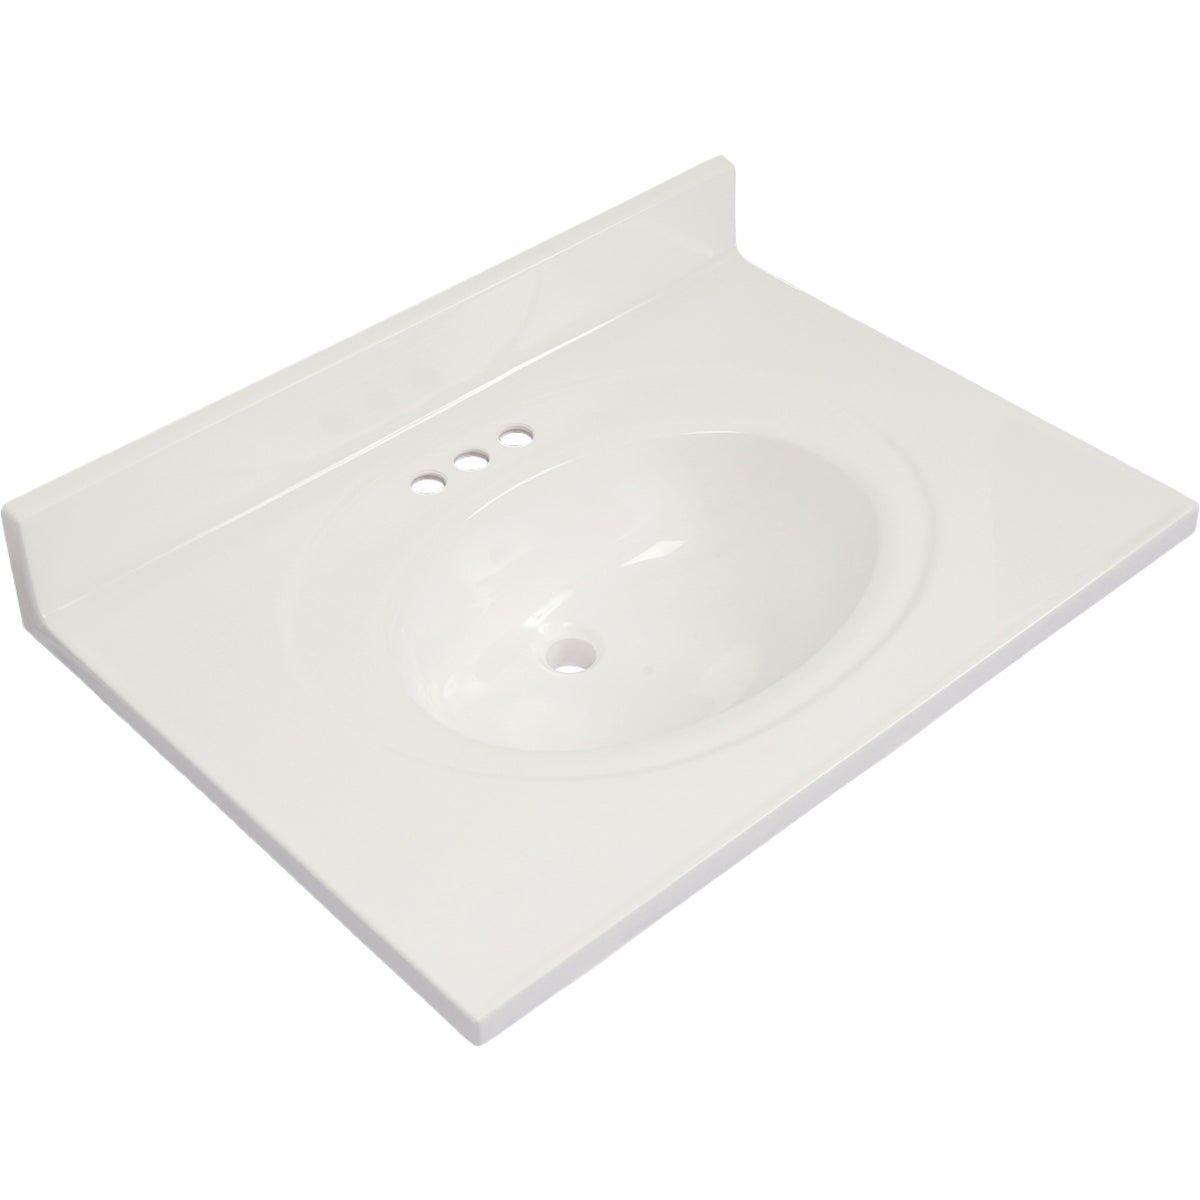 Modular Vanity Tops 31 In. W x 22 In. D Solid White Cultured Marble Flat Edge Single Sink Vanity Top with Oval Bowl